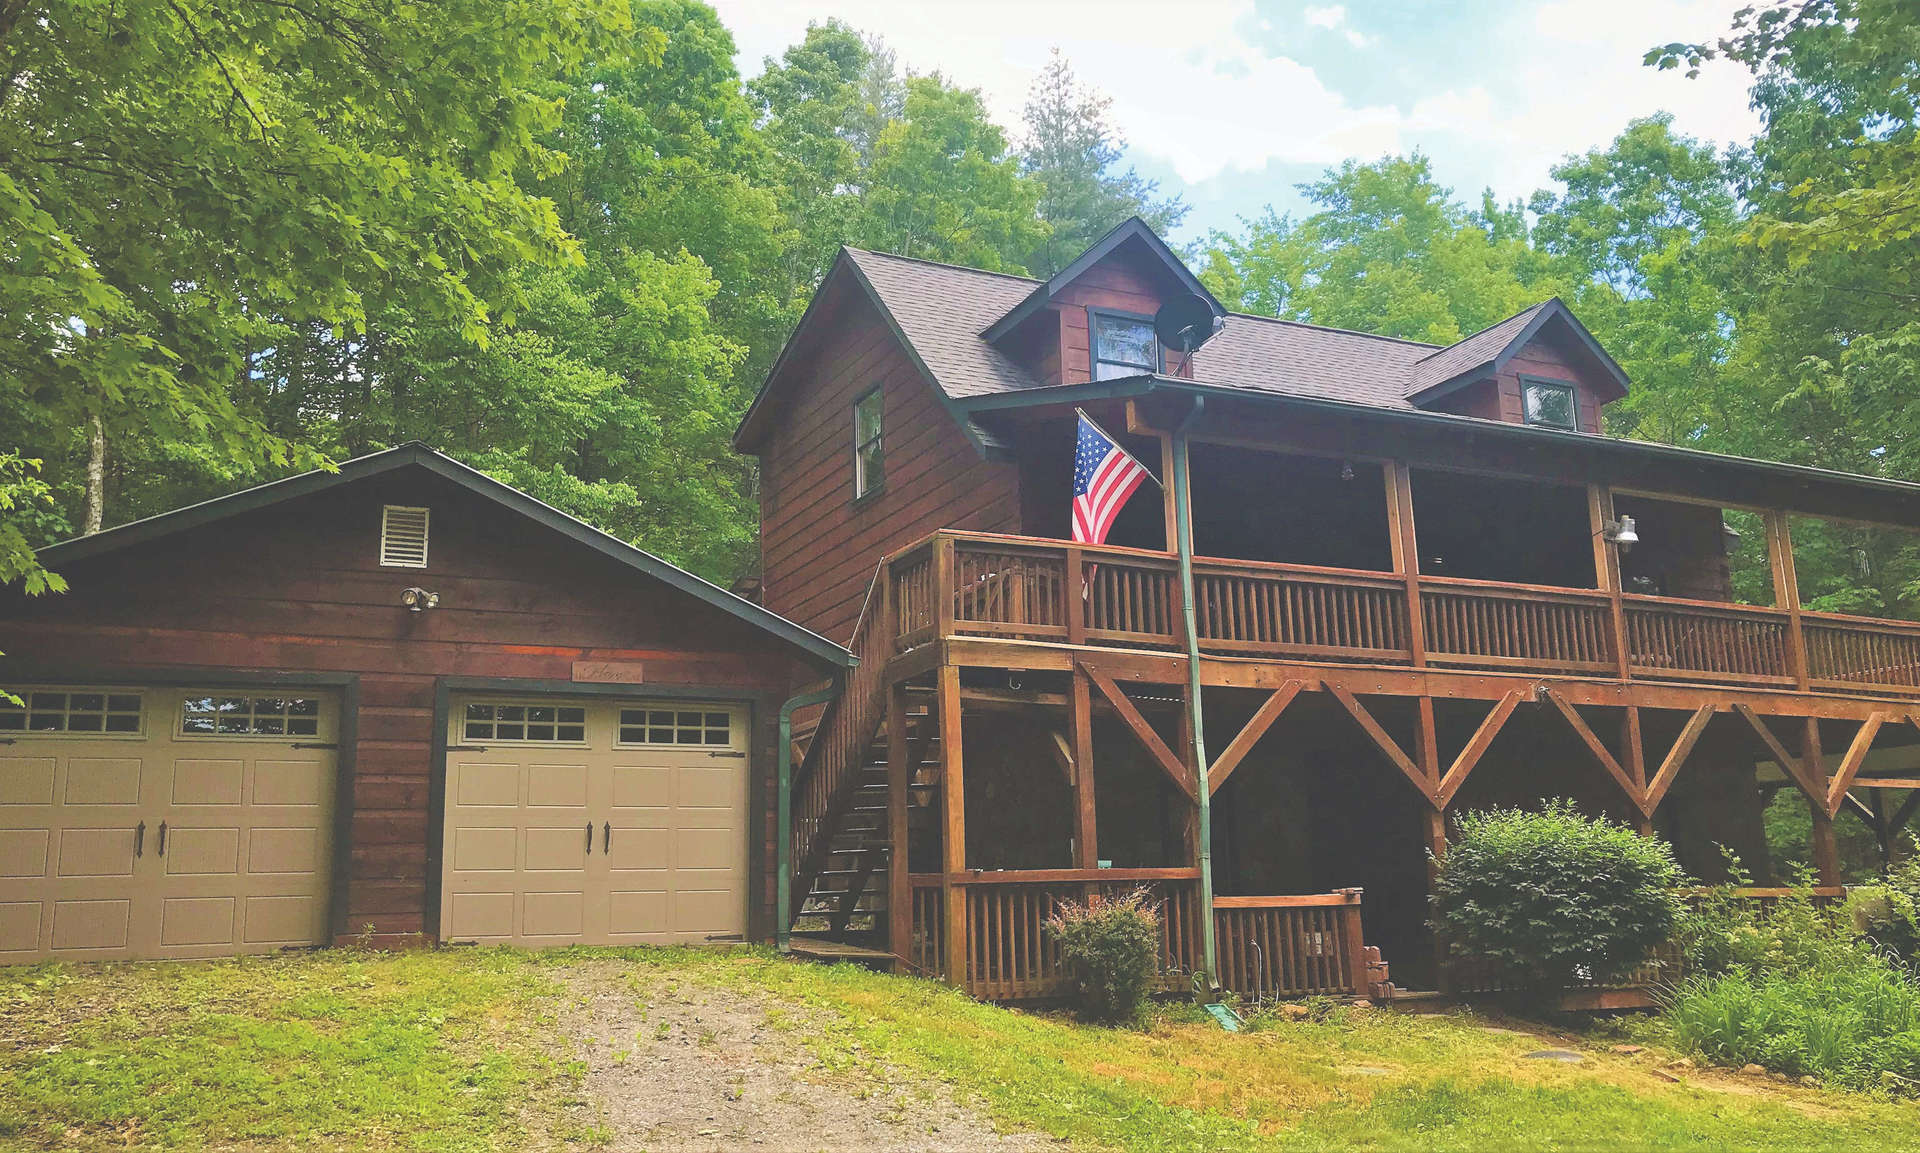 LOG CABIN IN THE WOODS!  Enjoy lots of peace and quiet in this 2-bedroom, 3-bath log cabin located on 1.38 acres in the Painted Laurel community.